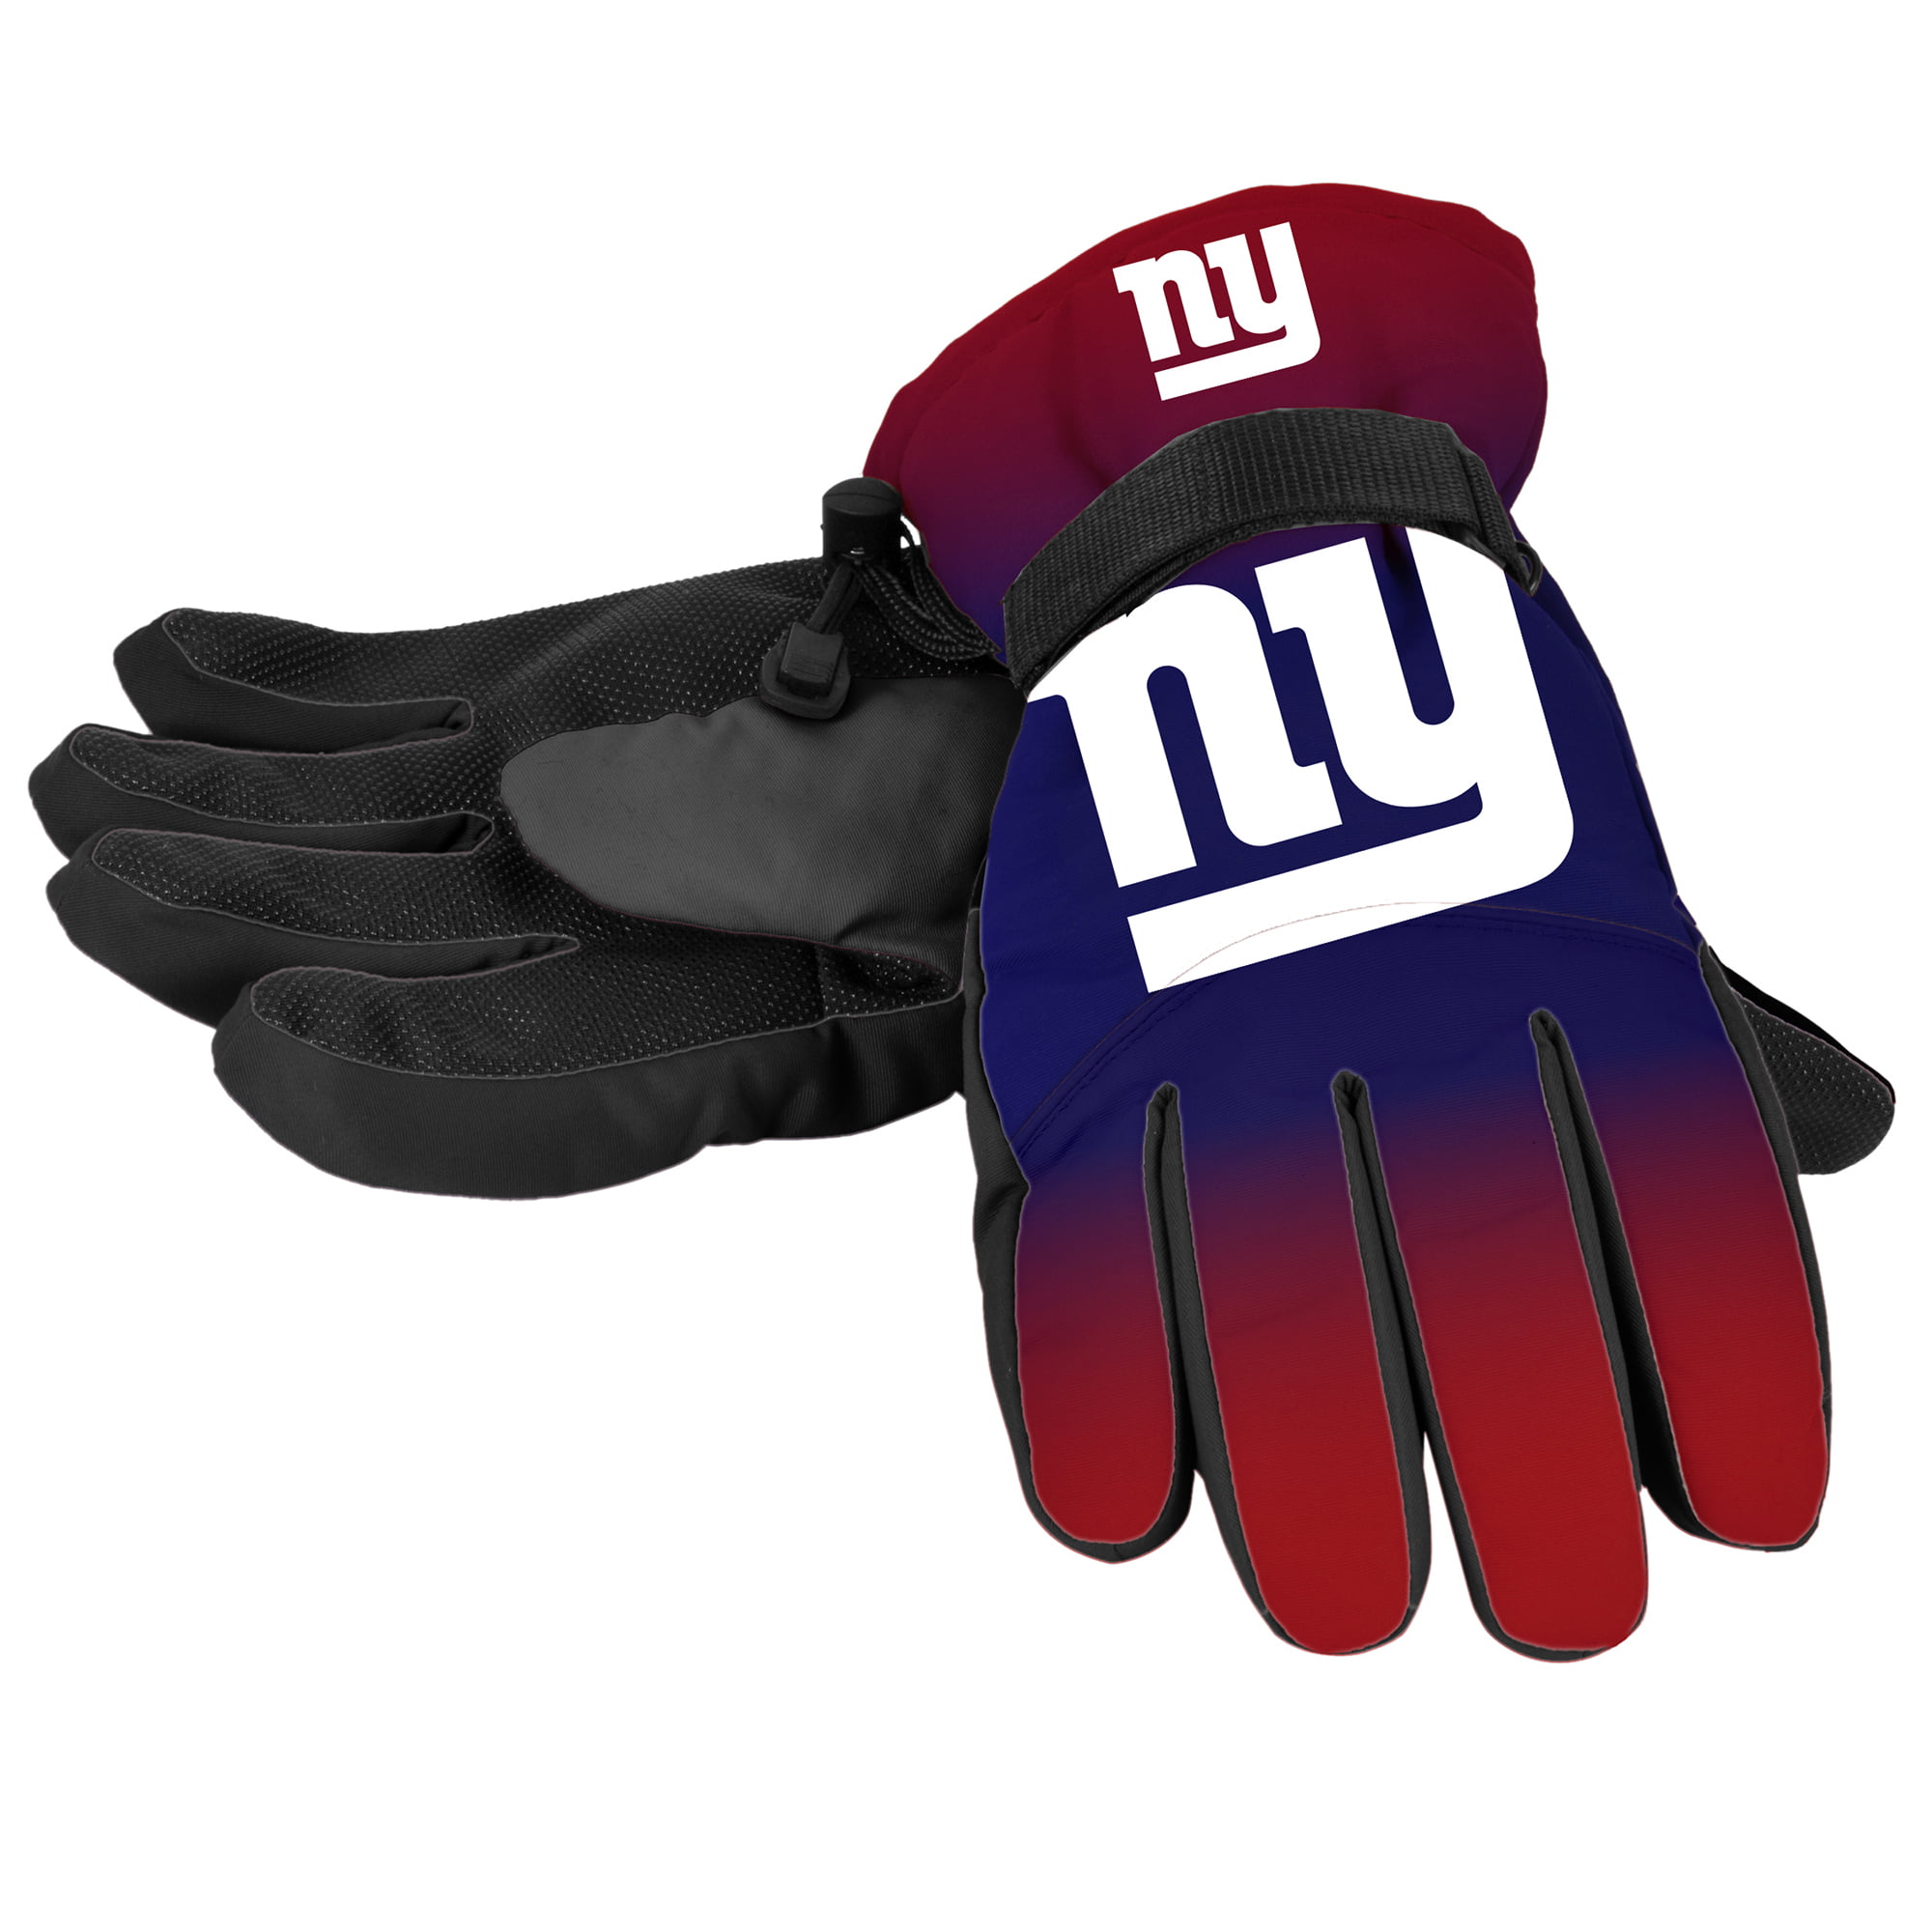 Forever Collectibles - NFL Gradient Big Logo Insulated Gloves